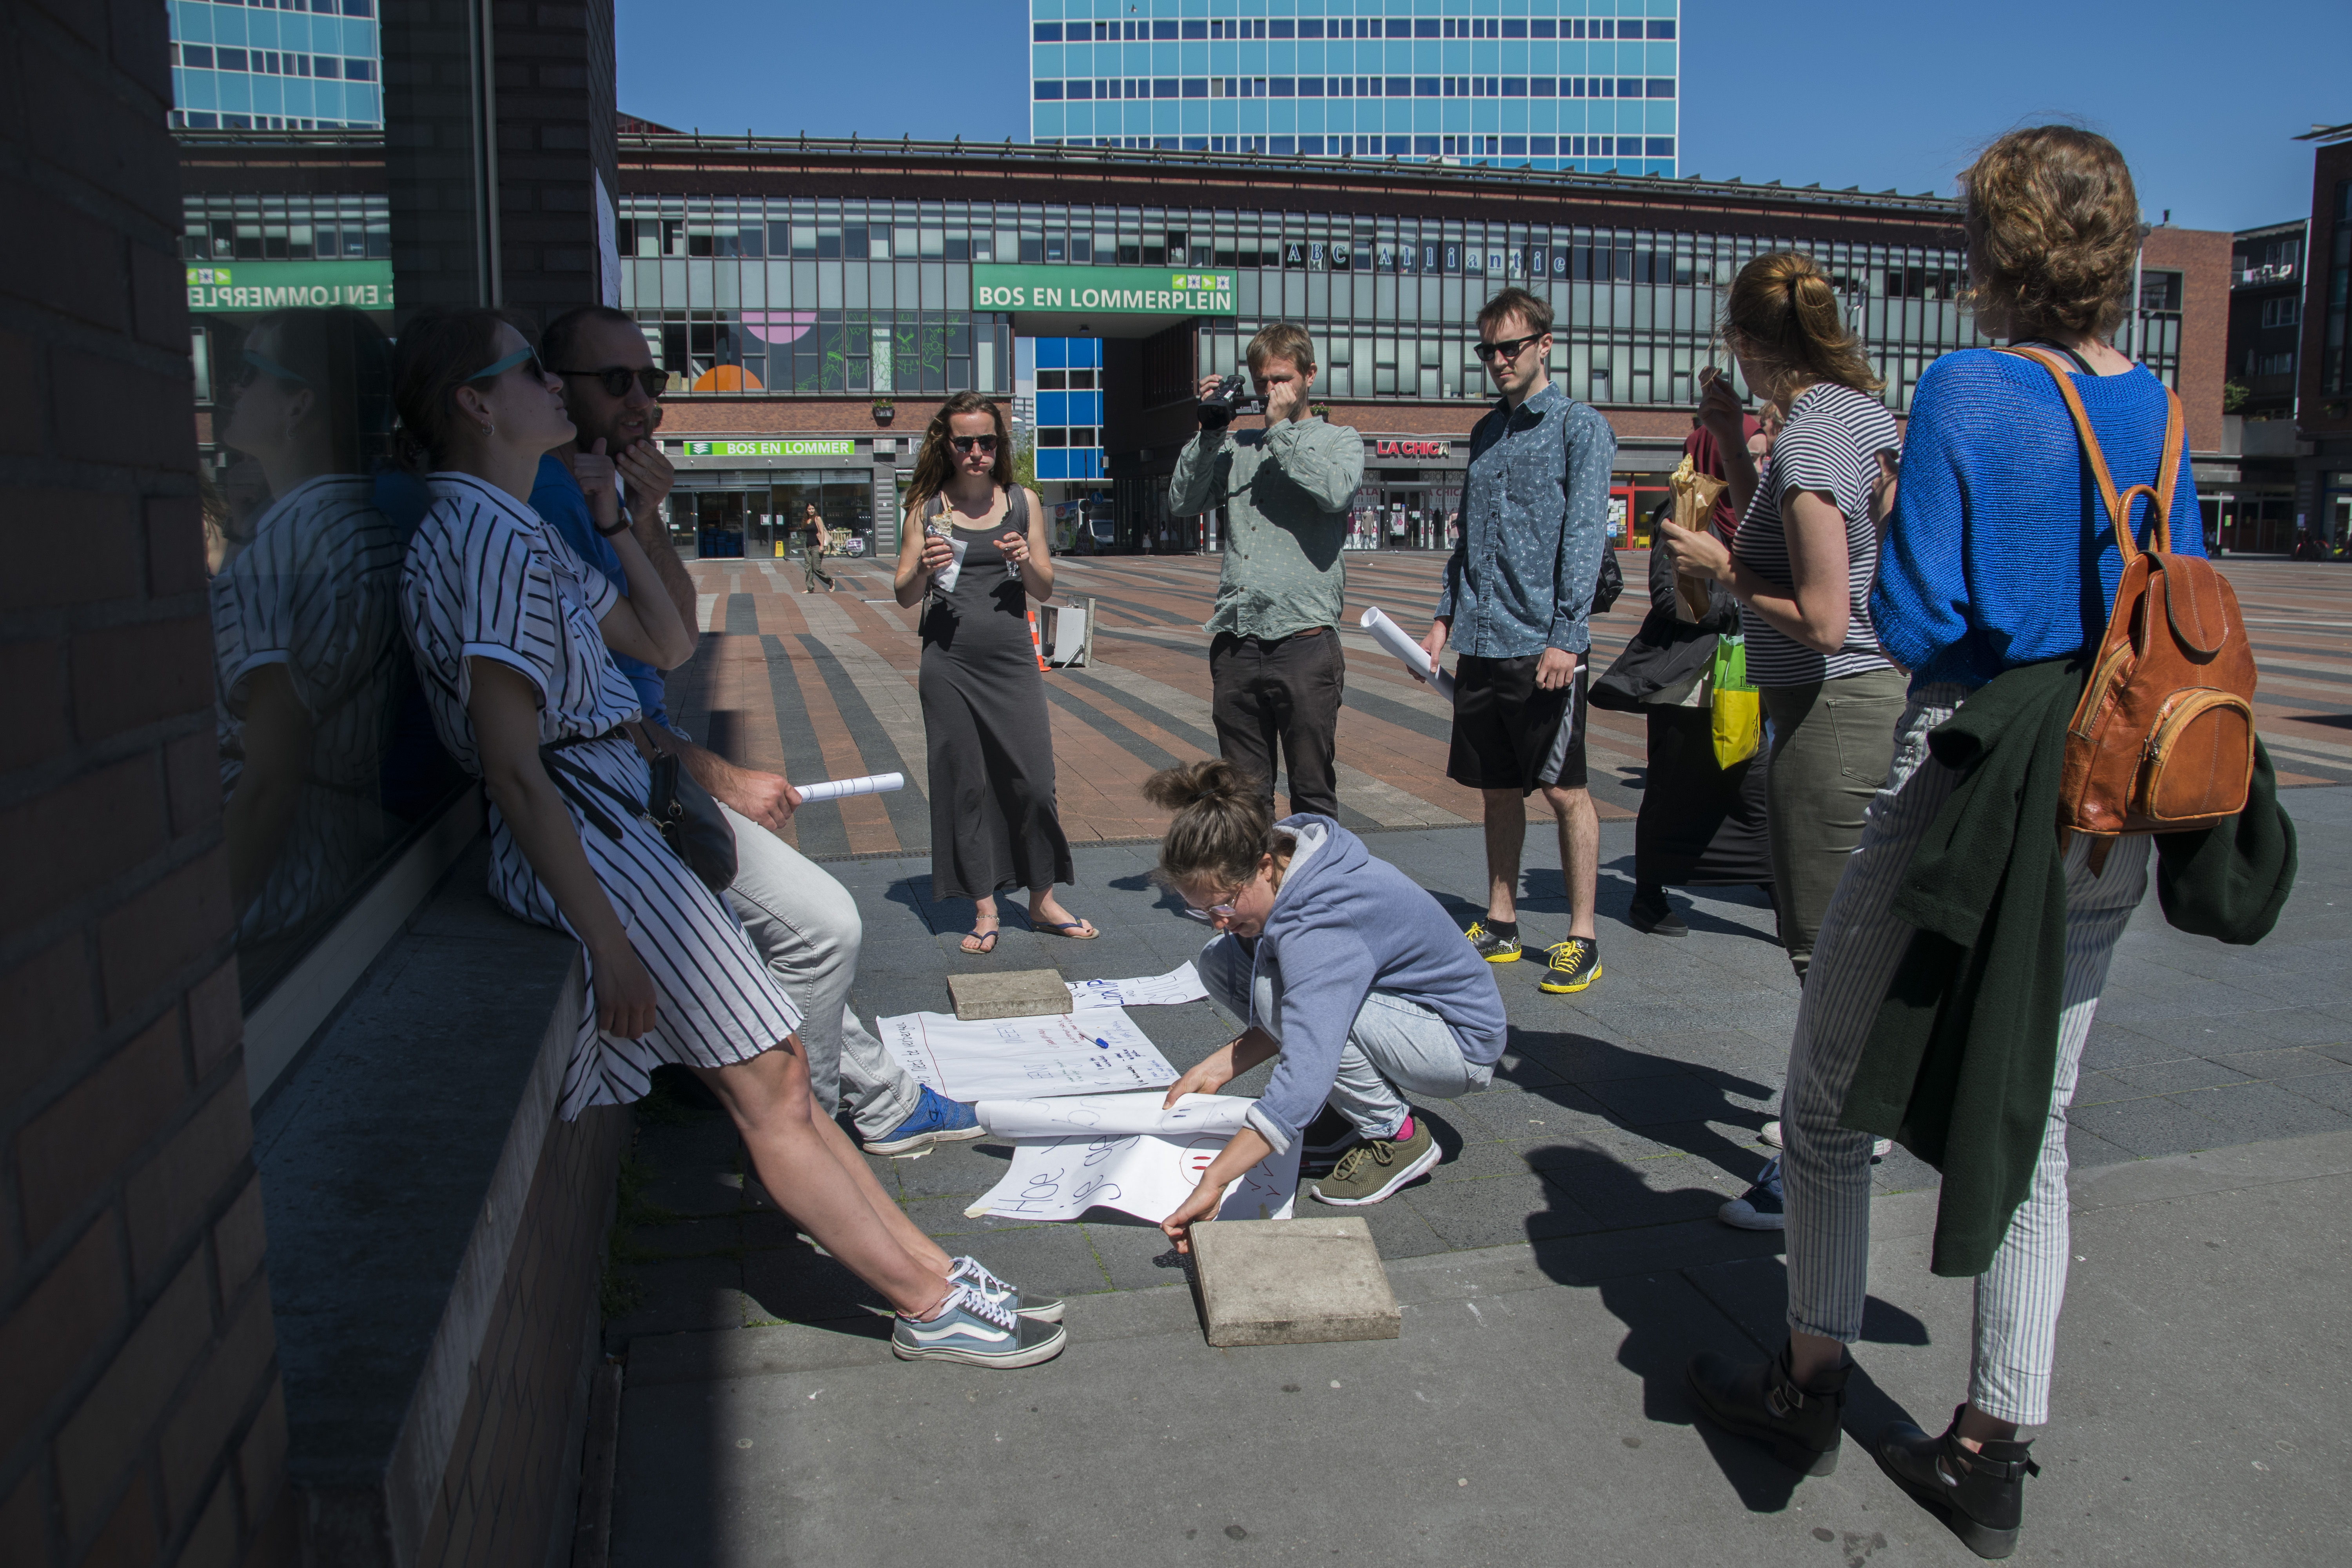 Students gathering the results of their discussions with passersby at Bos en Lommerplein (Photo: Martijn Gerritsen)